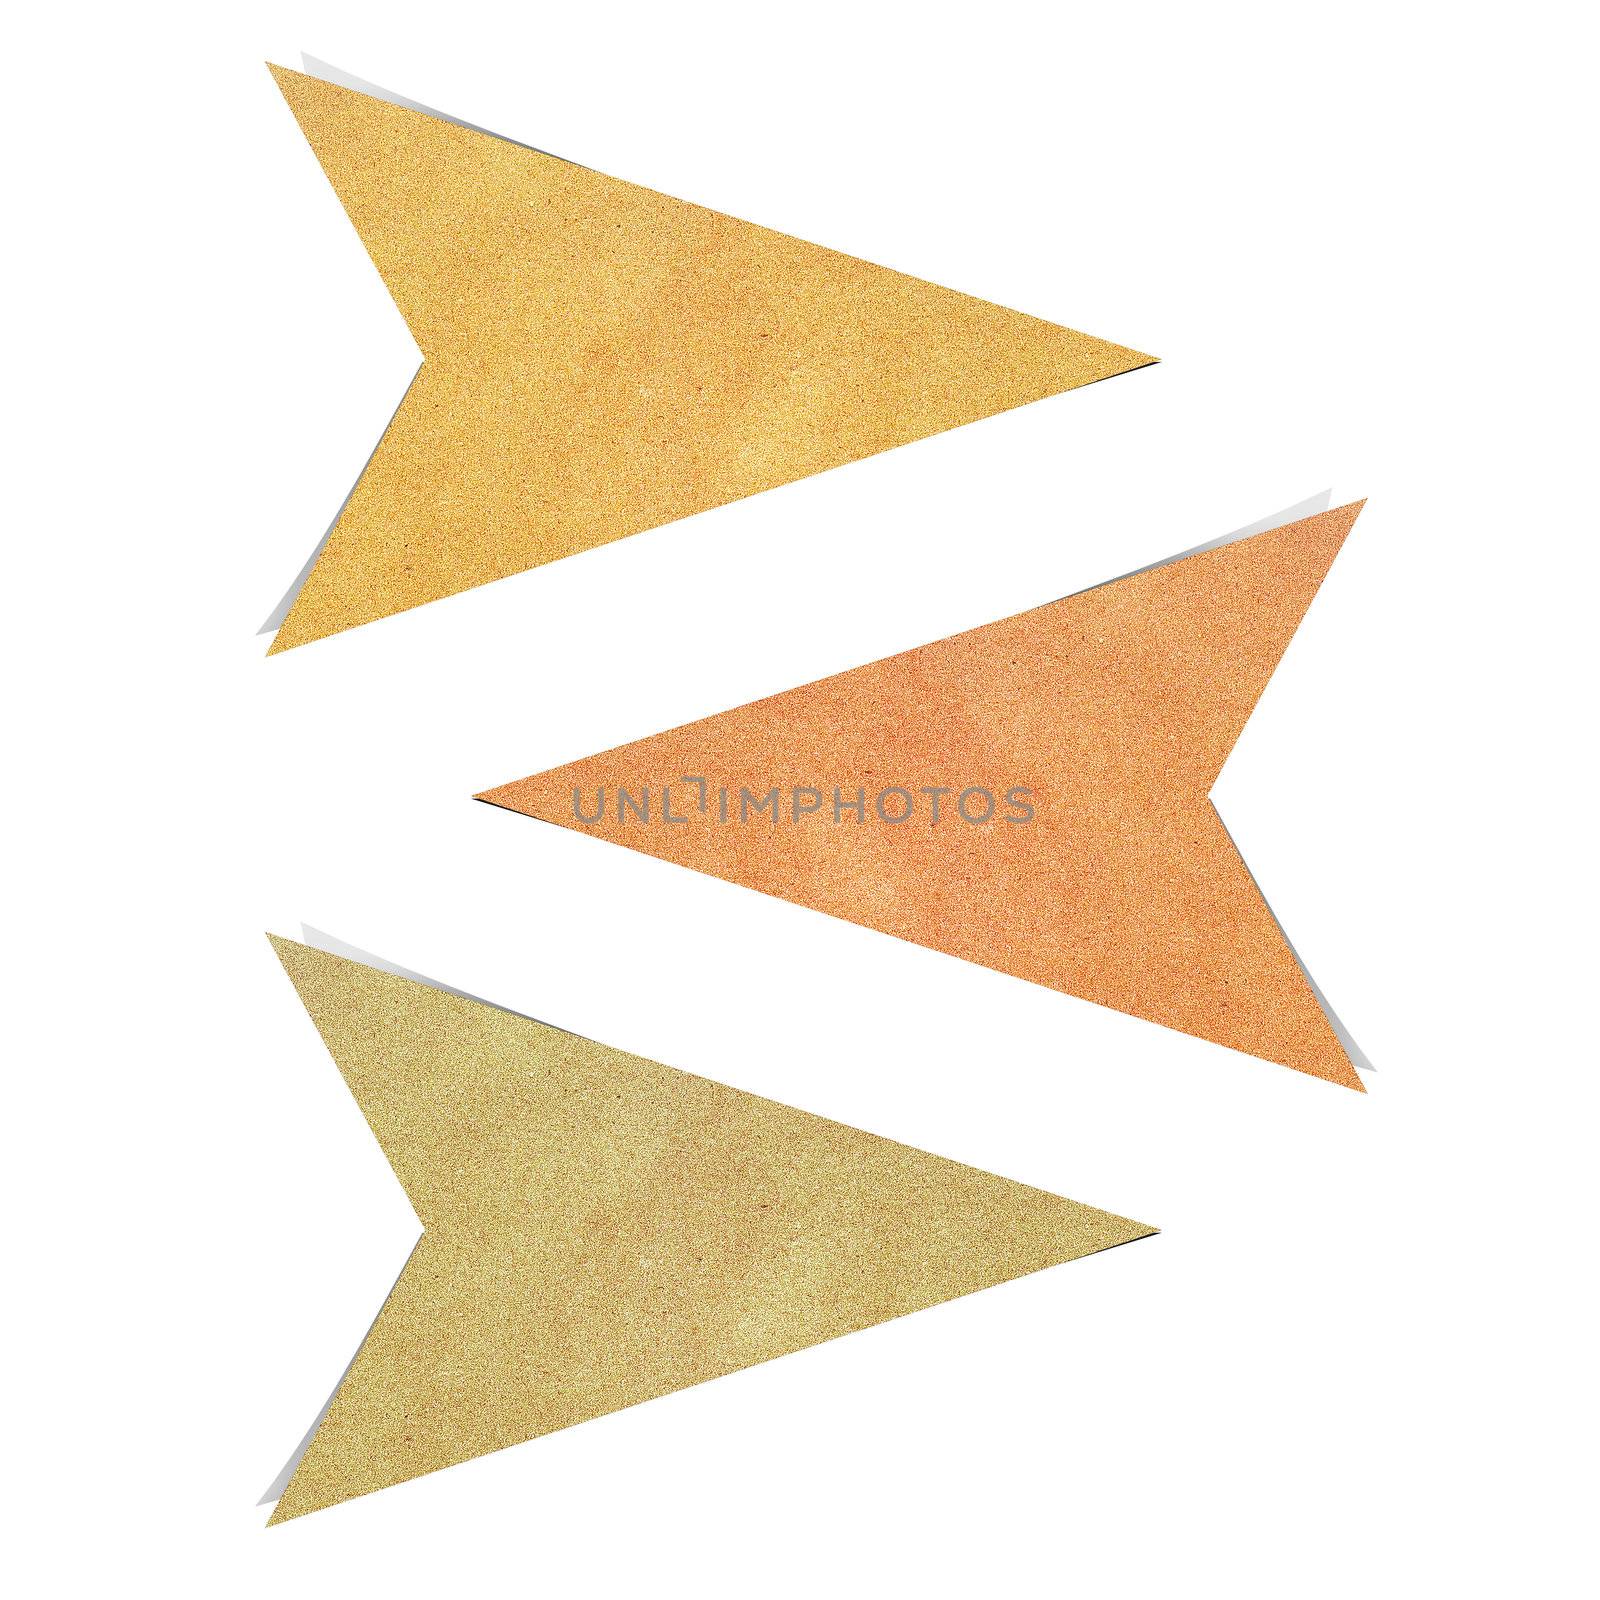 Paper texture ,Arrow tag recycled paper on white background by jakgree